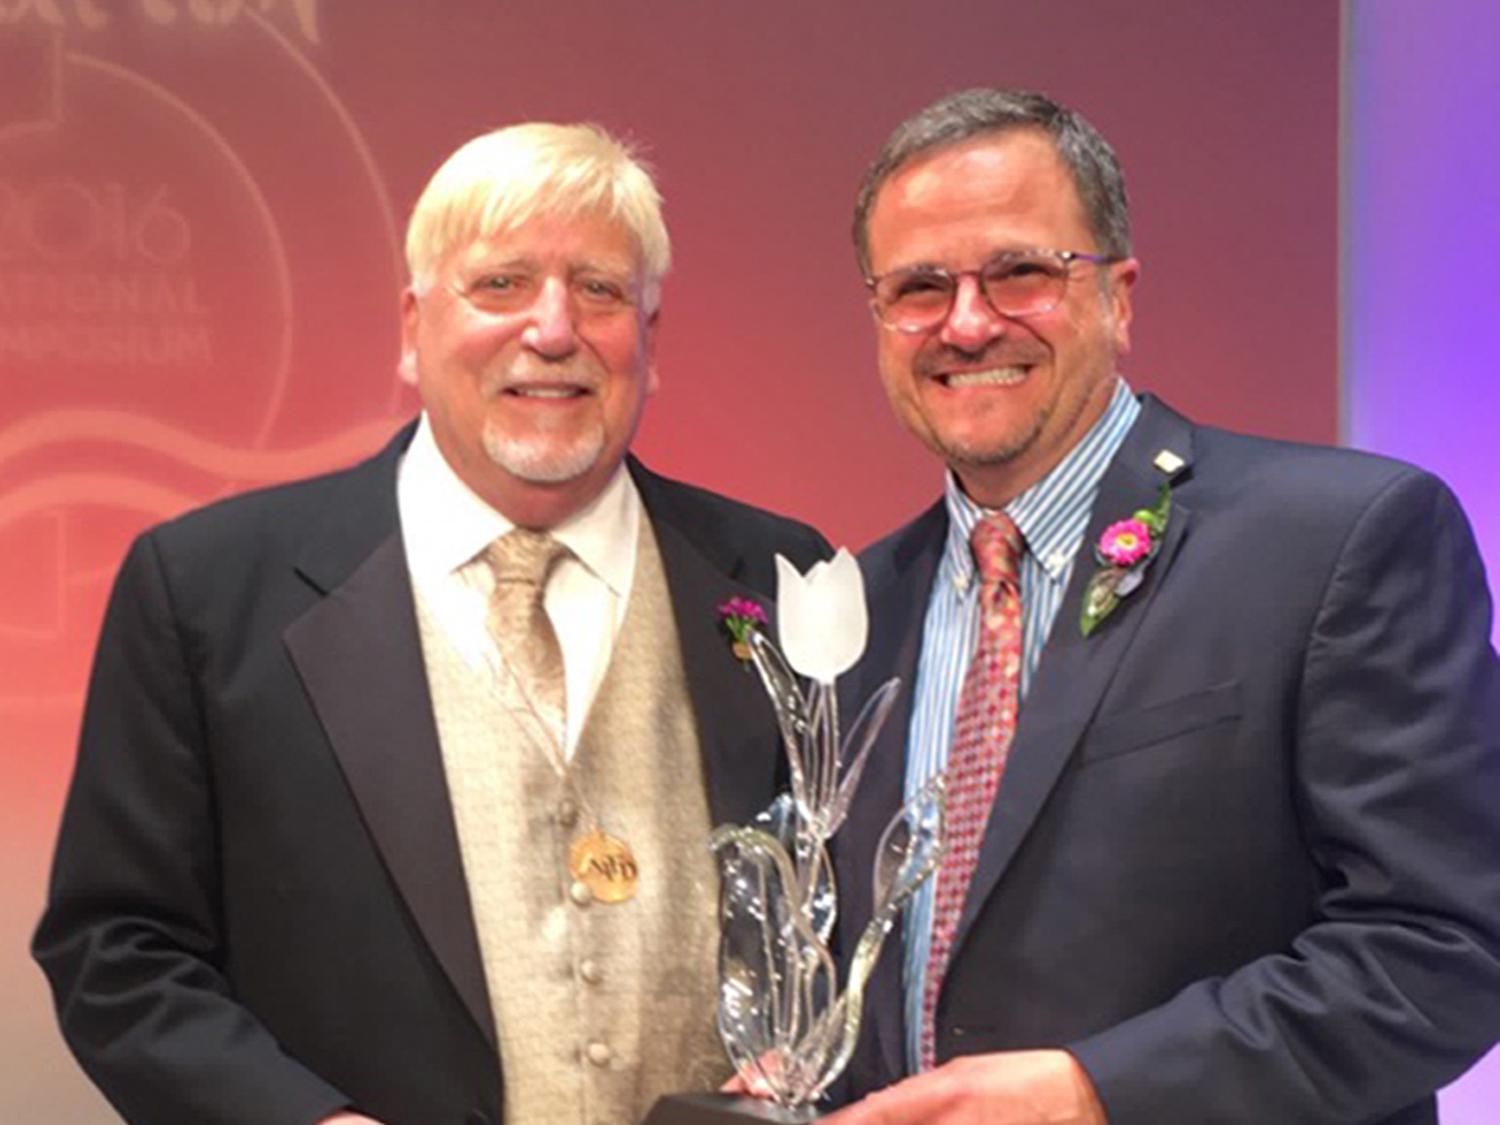 Mississippi State University Extension Service floral design specialist Jim DelPrince, right, accepted the American Institute of Floral Designers Award of Distinguished Service to the Floral Industry from Awards Committee Chairman Rich Salvaggio during the organization’s annual National Symposium in July. (Photo courtesy of American Institute of Floral Designers)